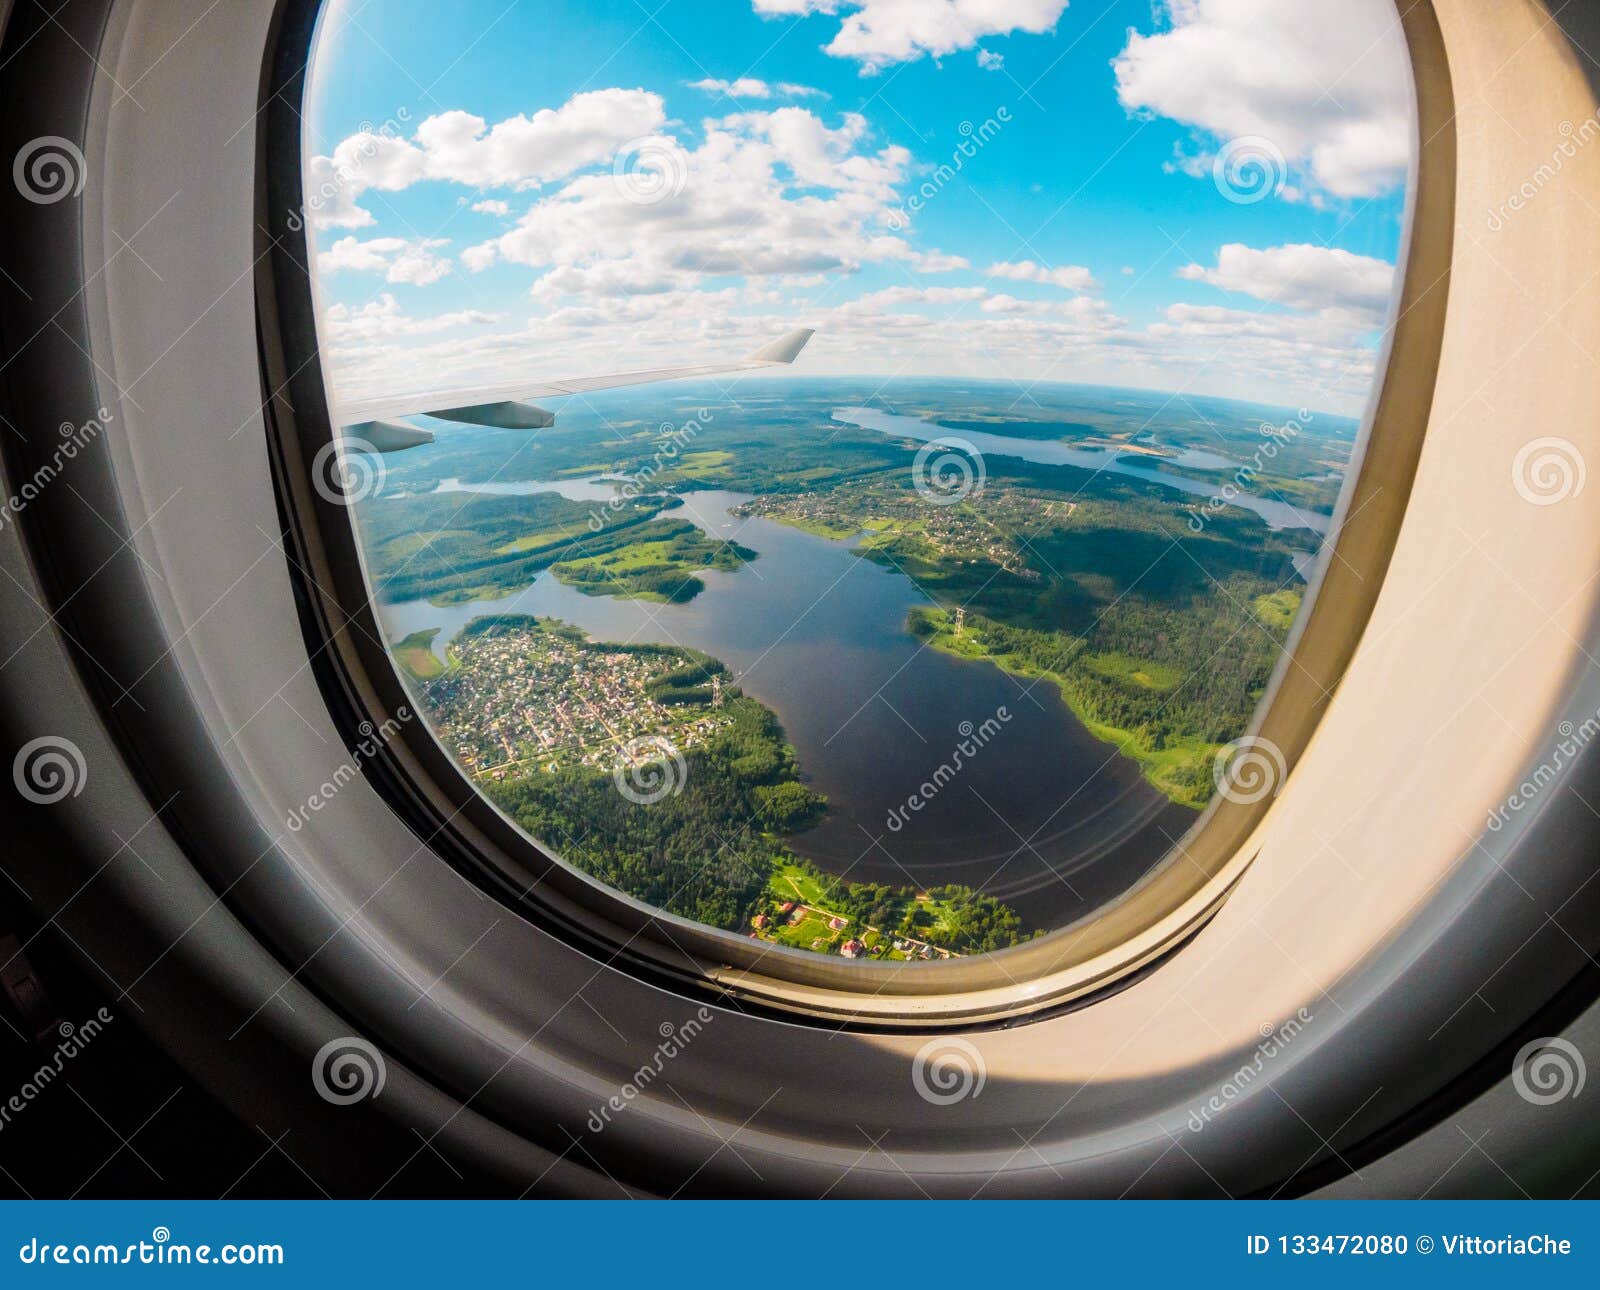 view of the planet earth through the airplane porthole